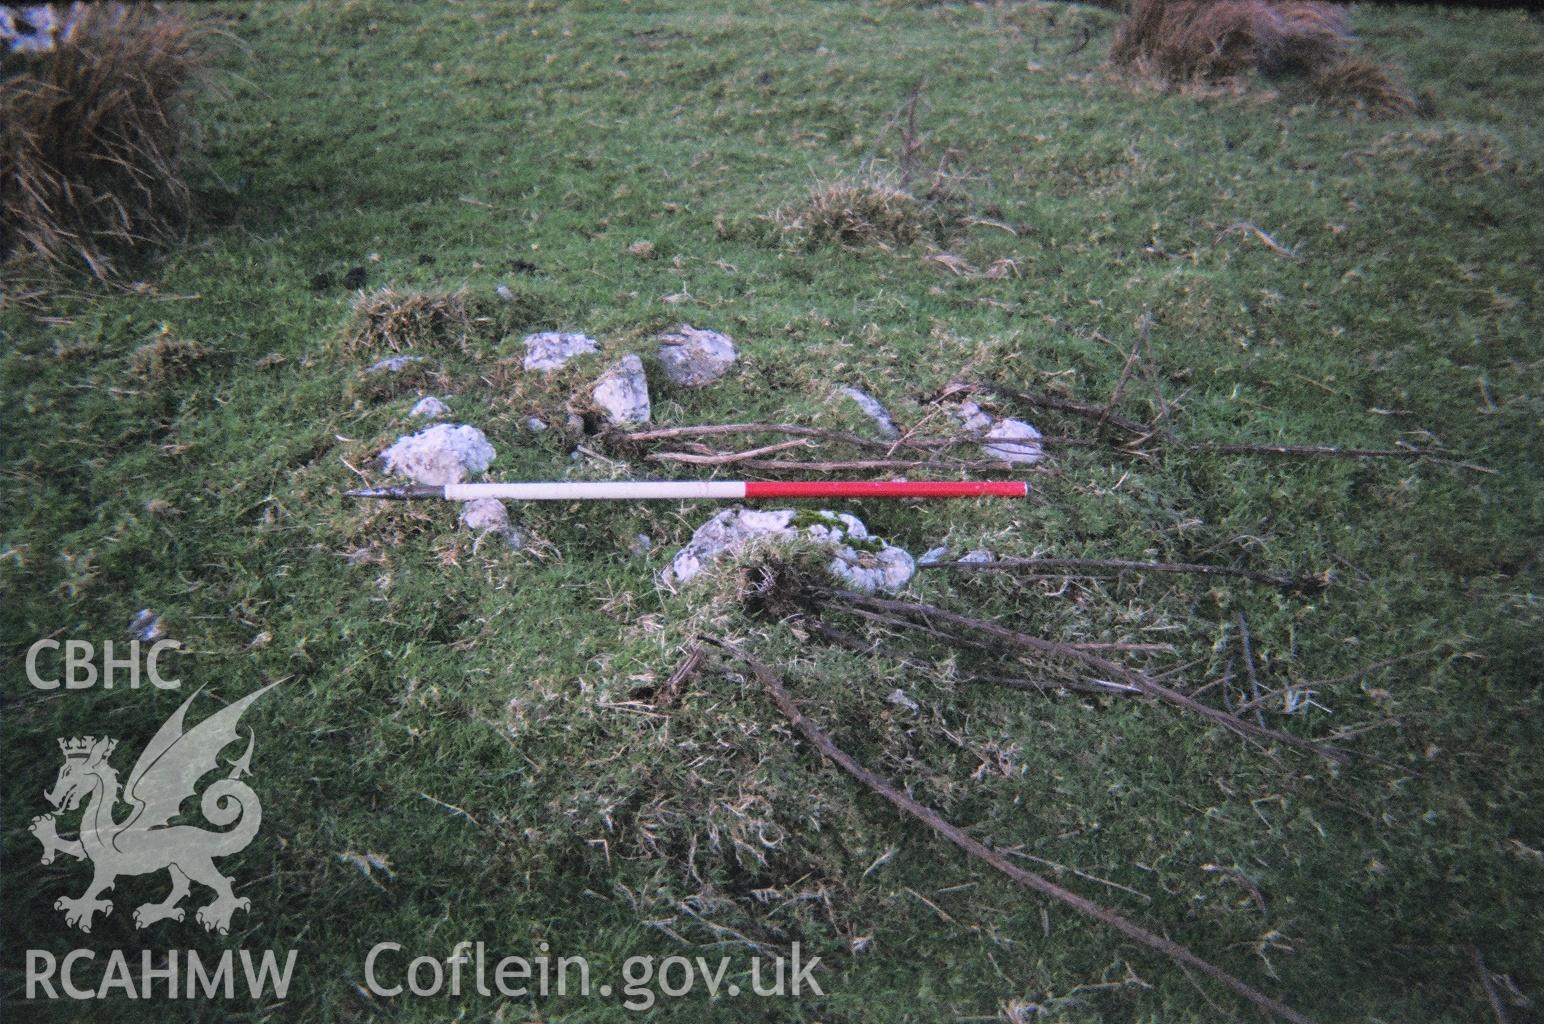 Digital colour photograph of Godor cairn VI taken on 09/12/2006 by A.C. Roseveare during the Berwyn North East Upland Survey by Archaeophysica.